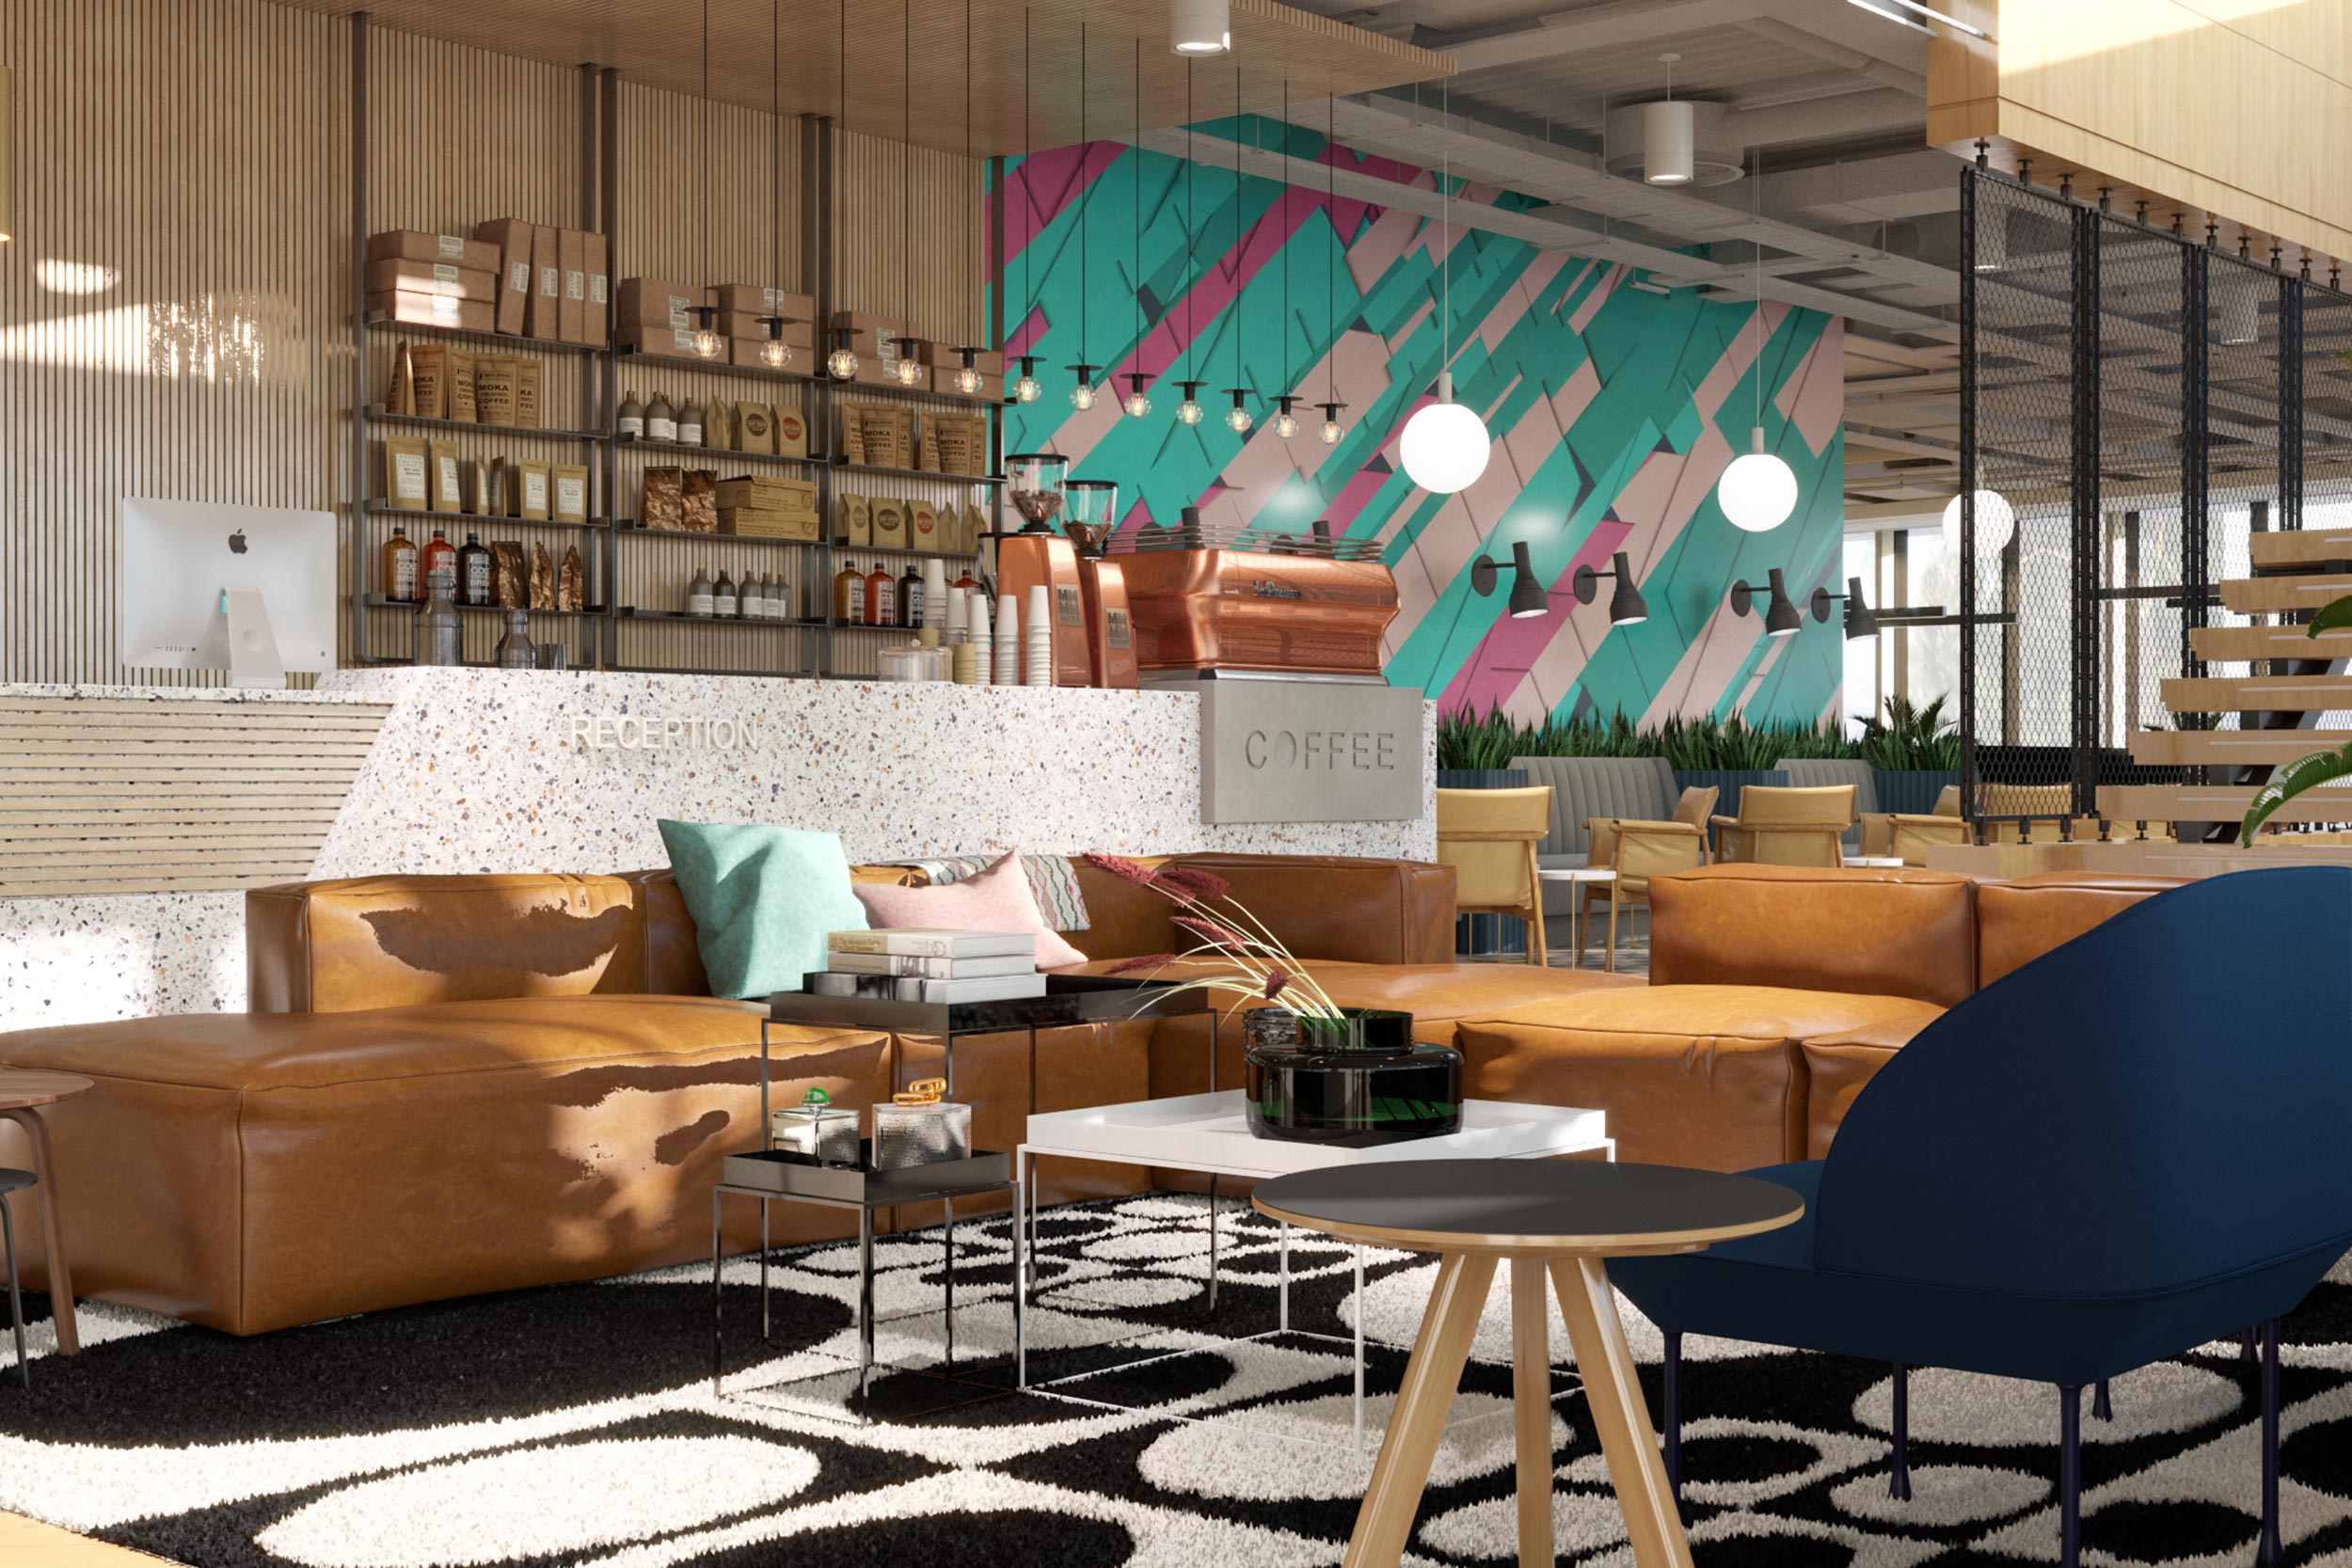 Hotel, Bar, Coffee Shop Cafe and Restaurant Interior Design Food and Beverage Conceptual Visuals in London by Unit4 Studio